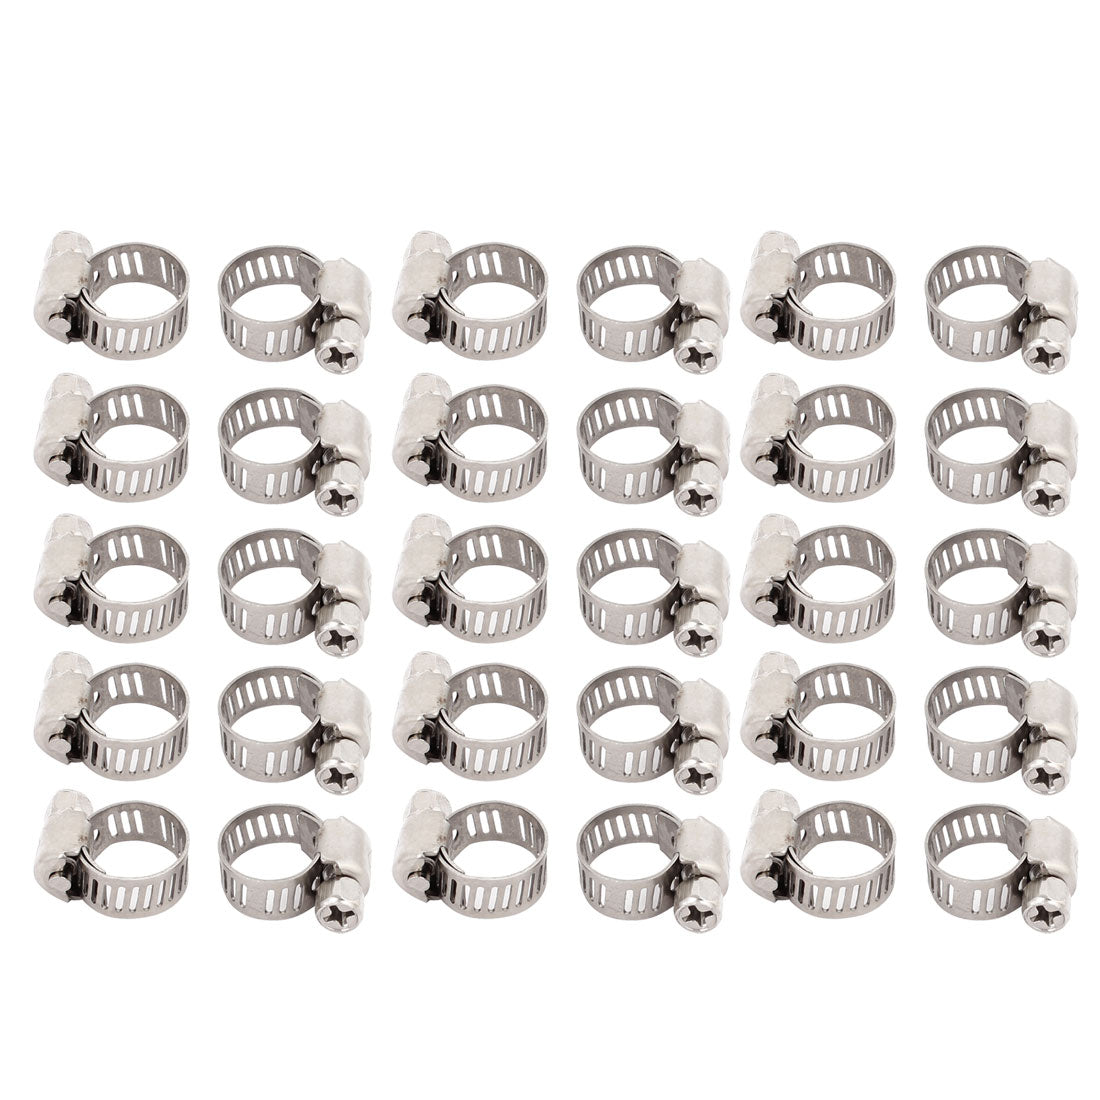 uxcell Uxcell 6mm-12mm Adjustable Range 8mm Width Iron  Gear Hose Clamp 30pcs